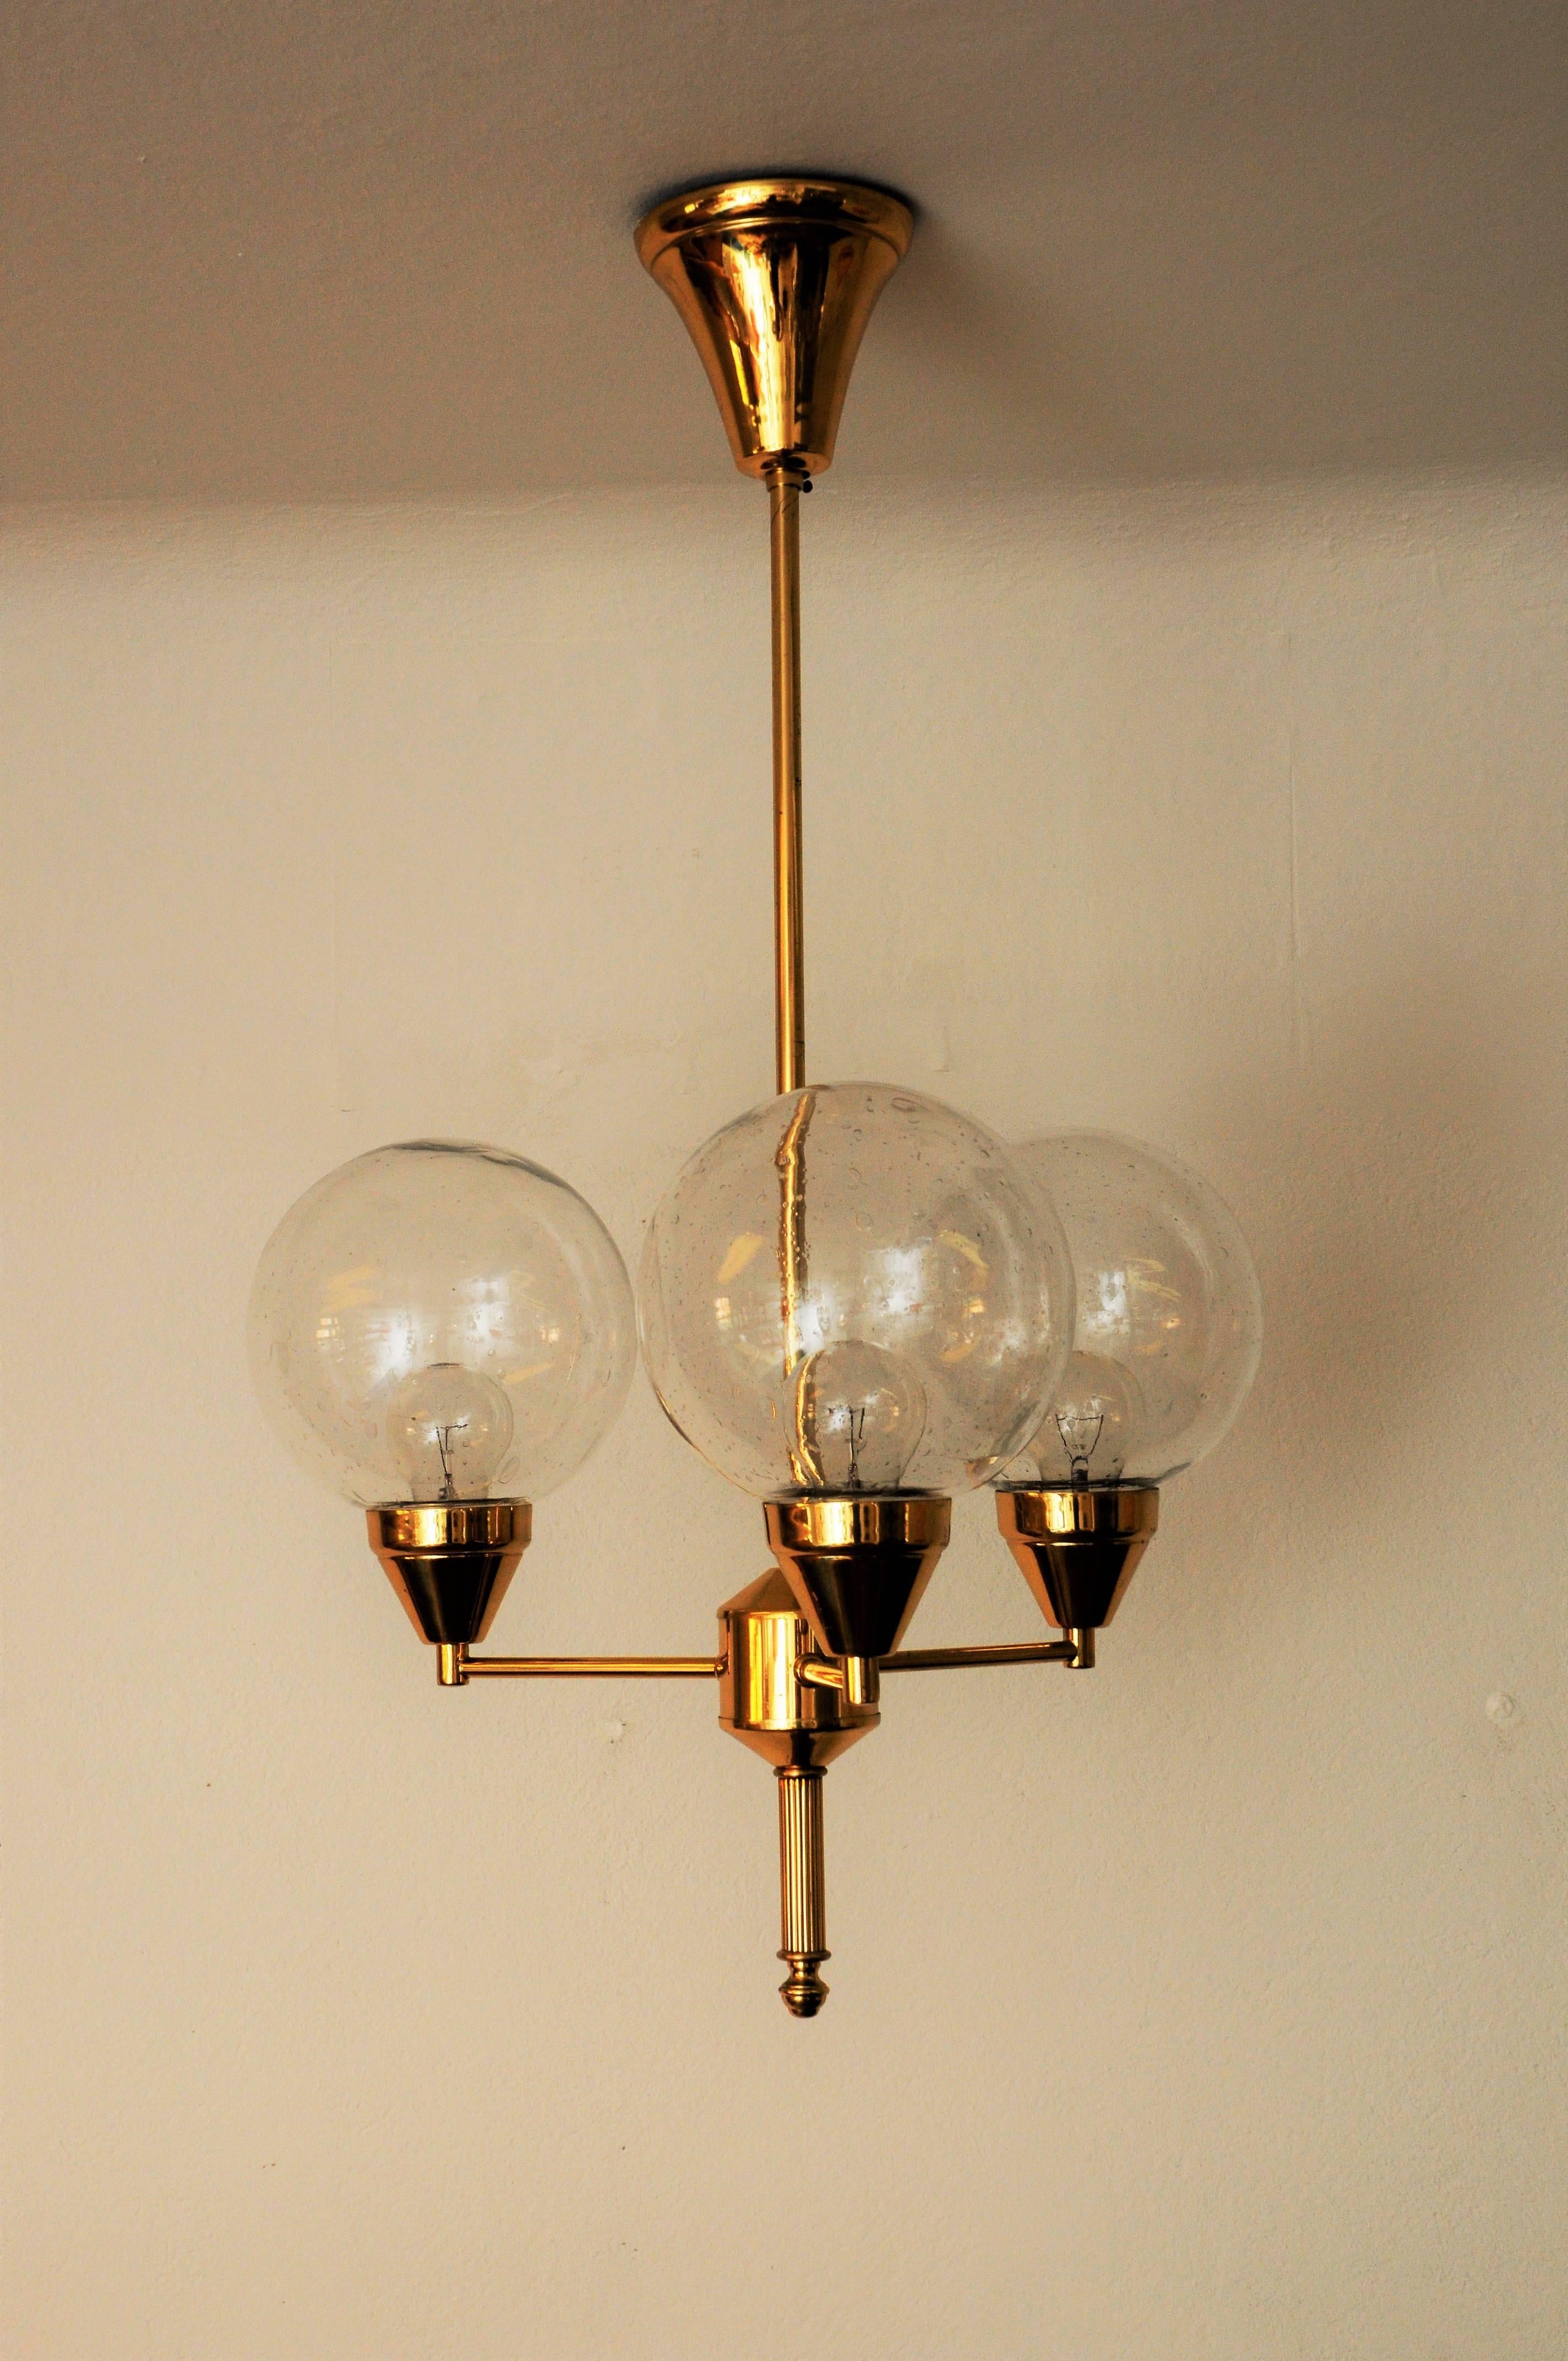 Midcentury Brass Ceiling Lamp with Three Clear Glass Domes 1960s, Sweden (Schwedisch)